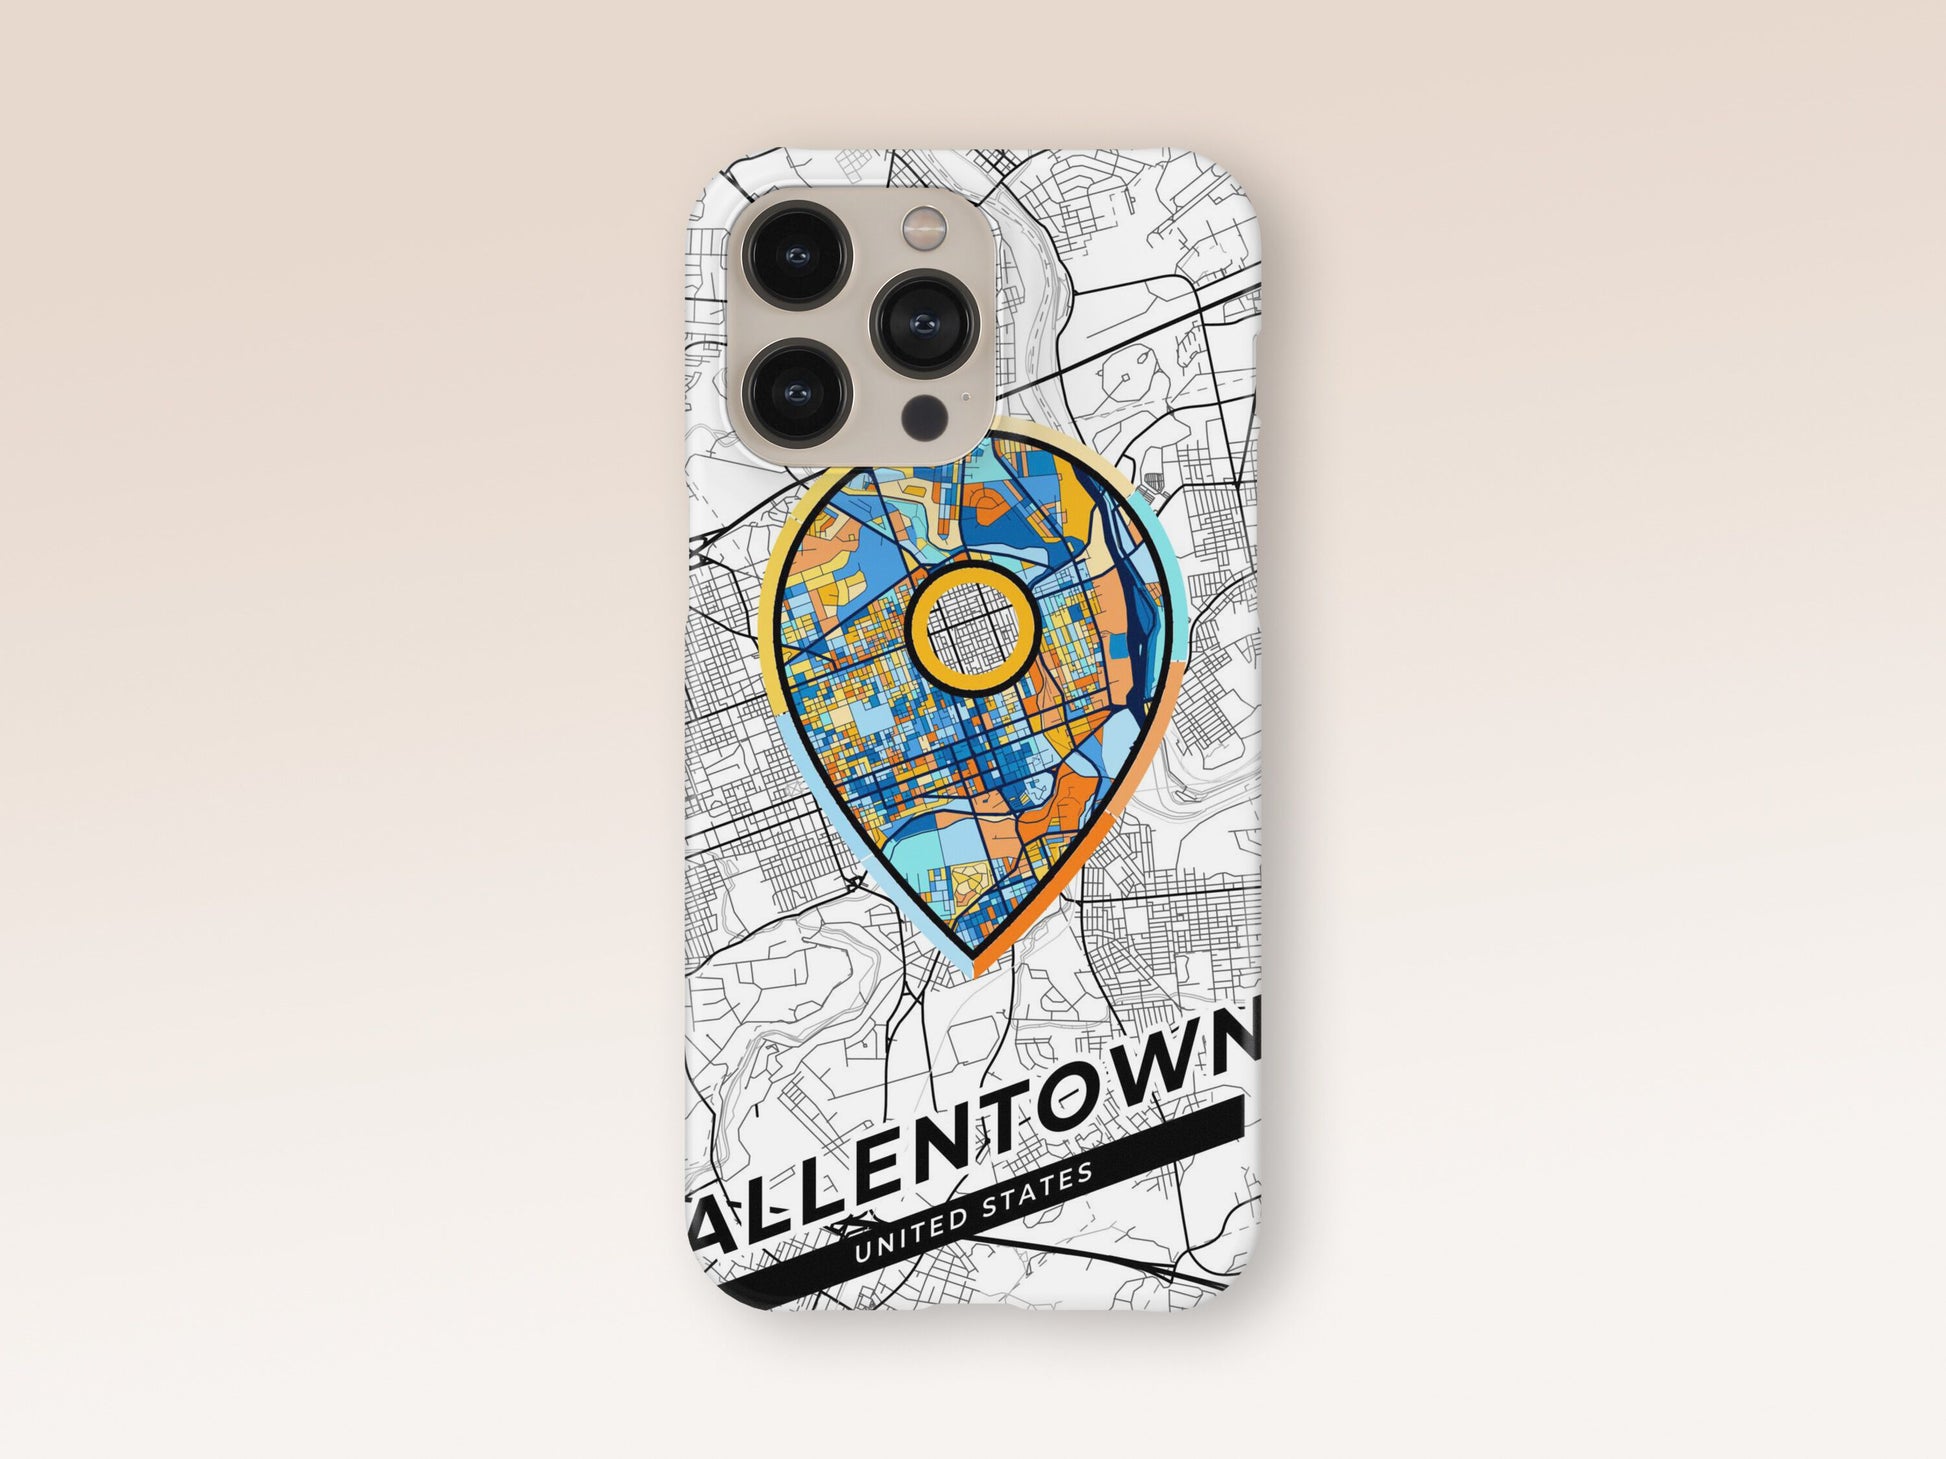 Allentown Pennsylvania slim phone case with colorful icon. Birthday, wedding or housewarming gift. Couple match cases. 1